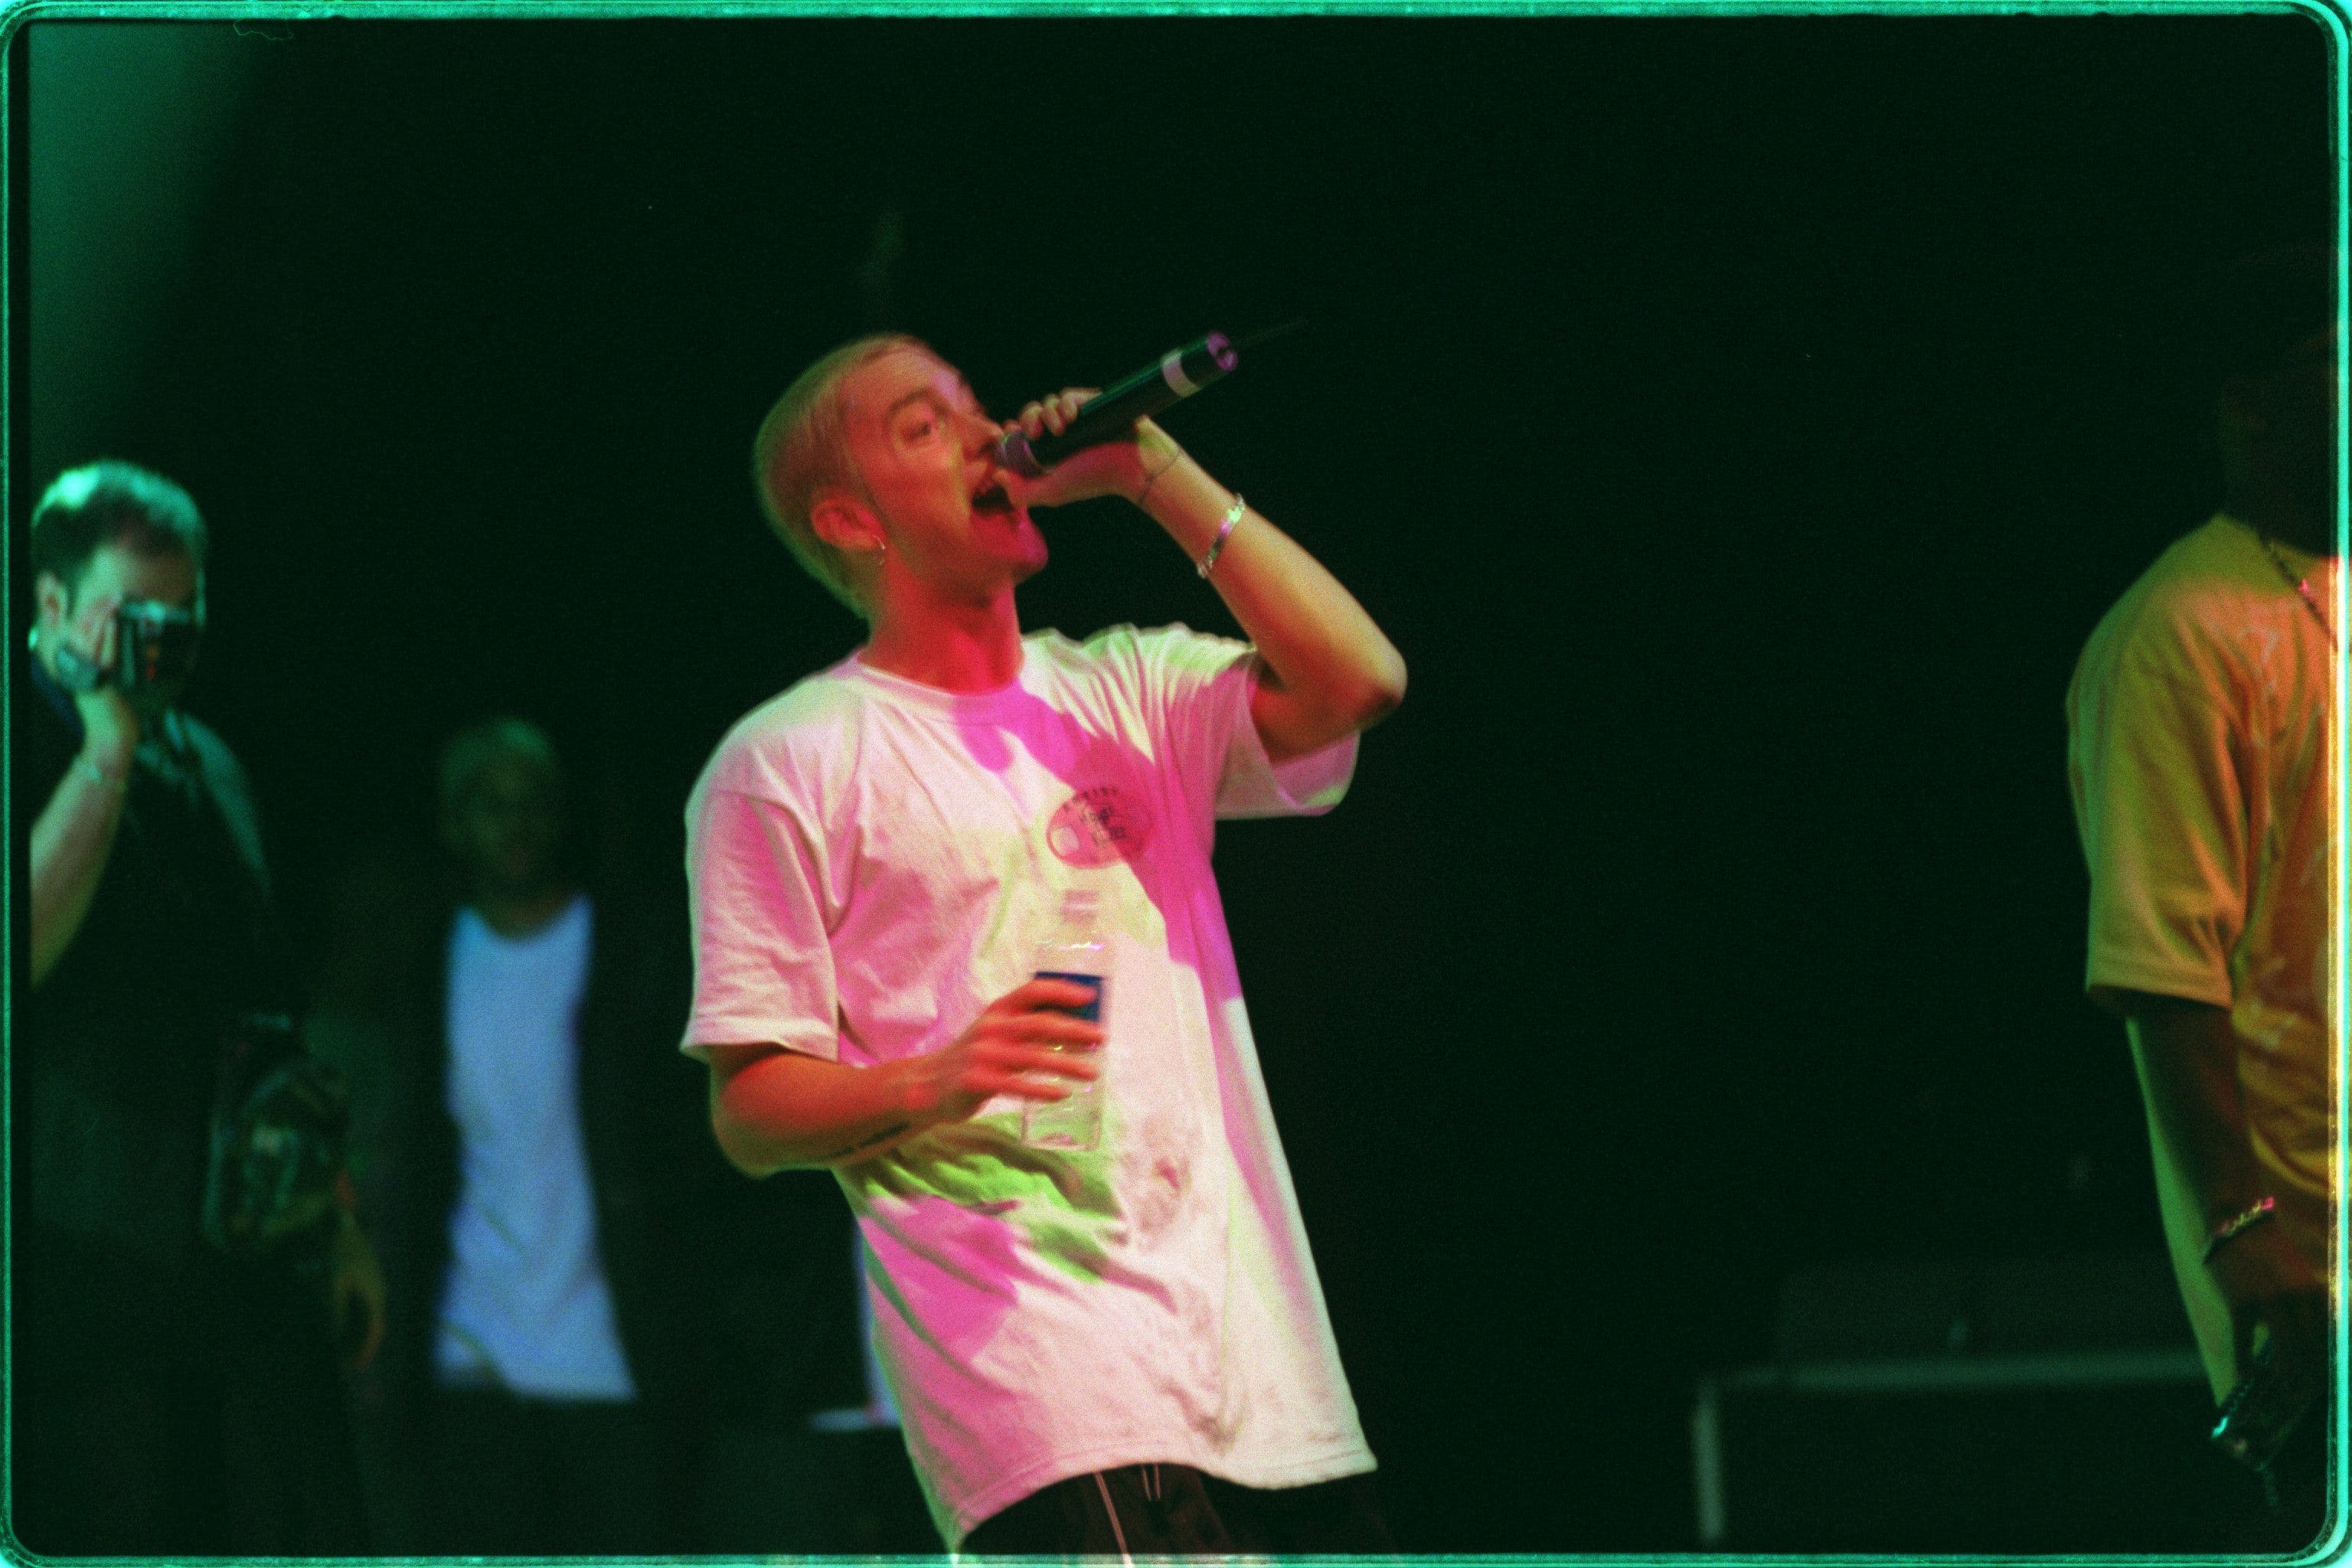 From the Free Press archives: Eminem introduces the world to Slim Shady in 1999